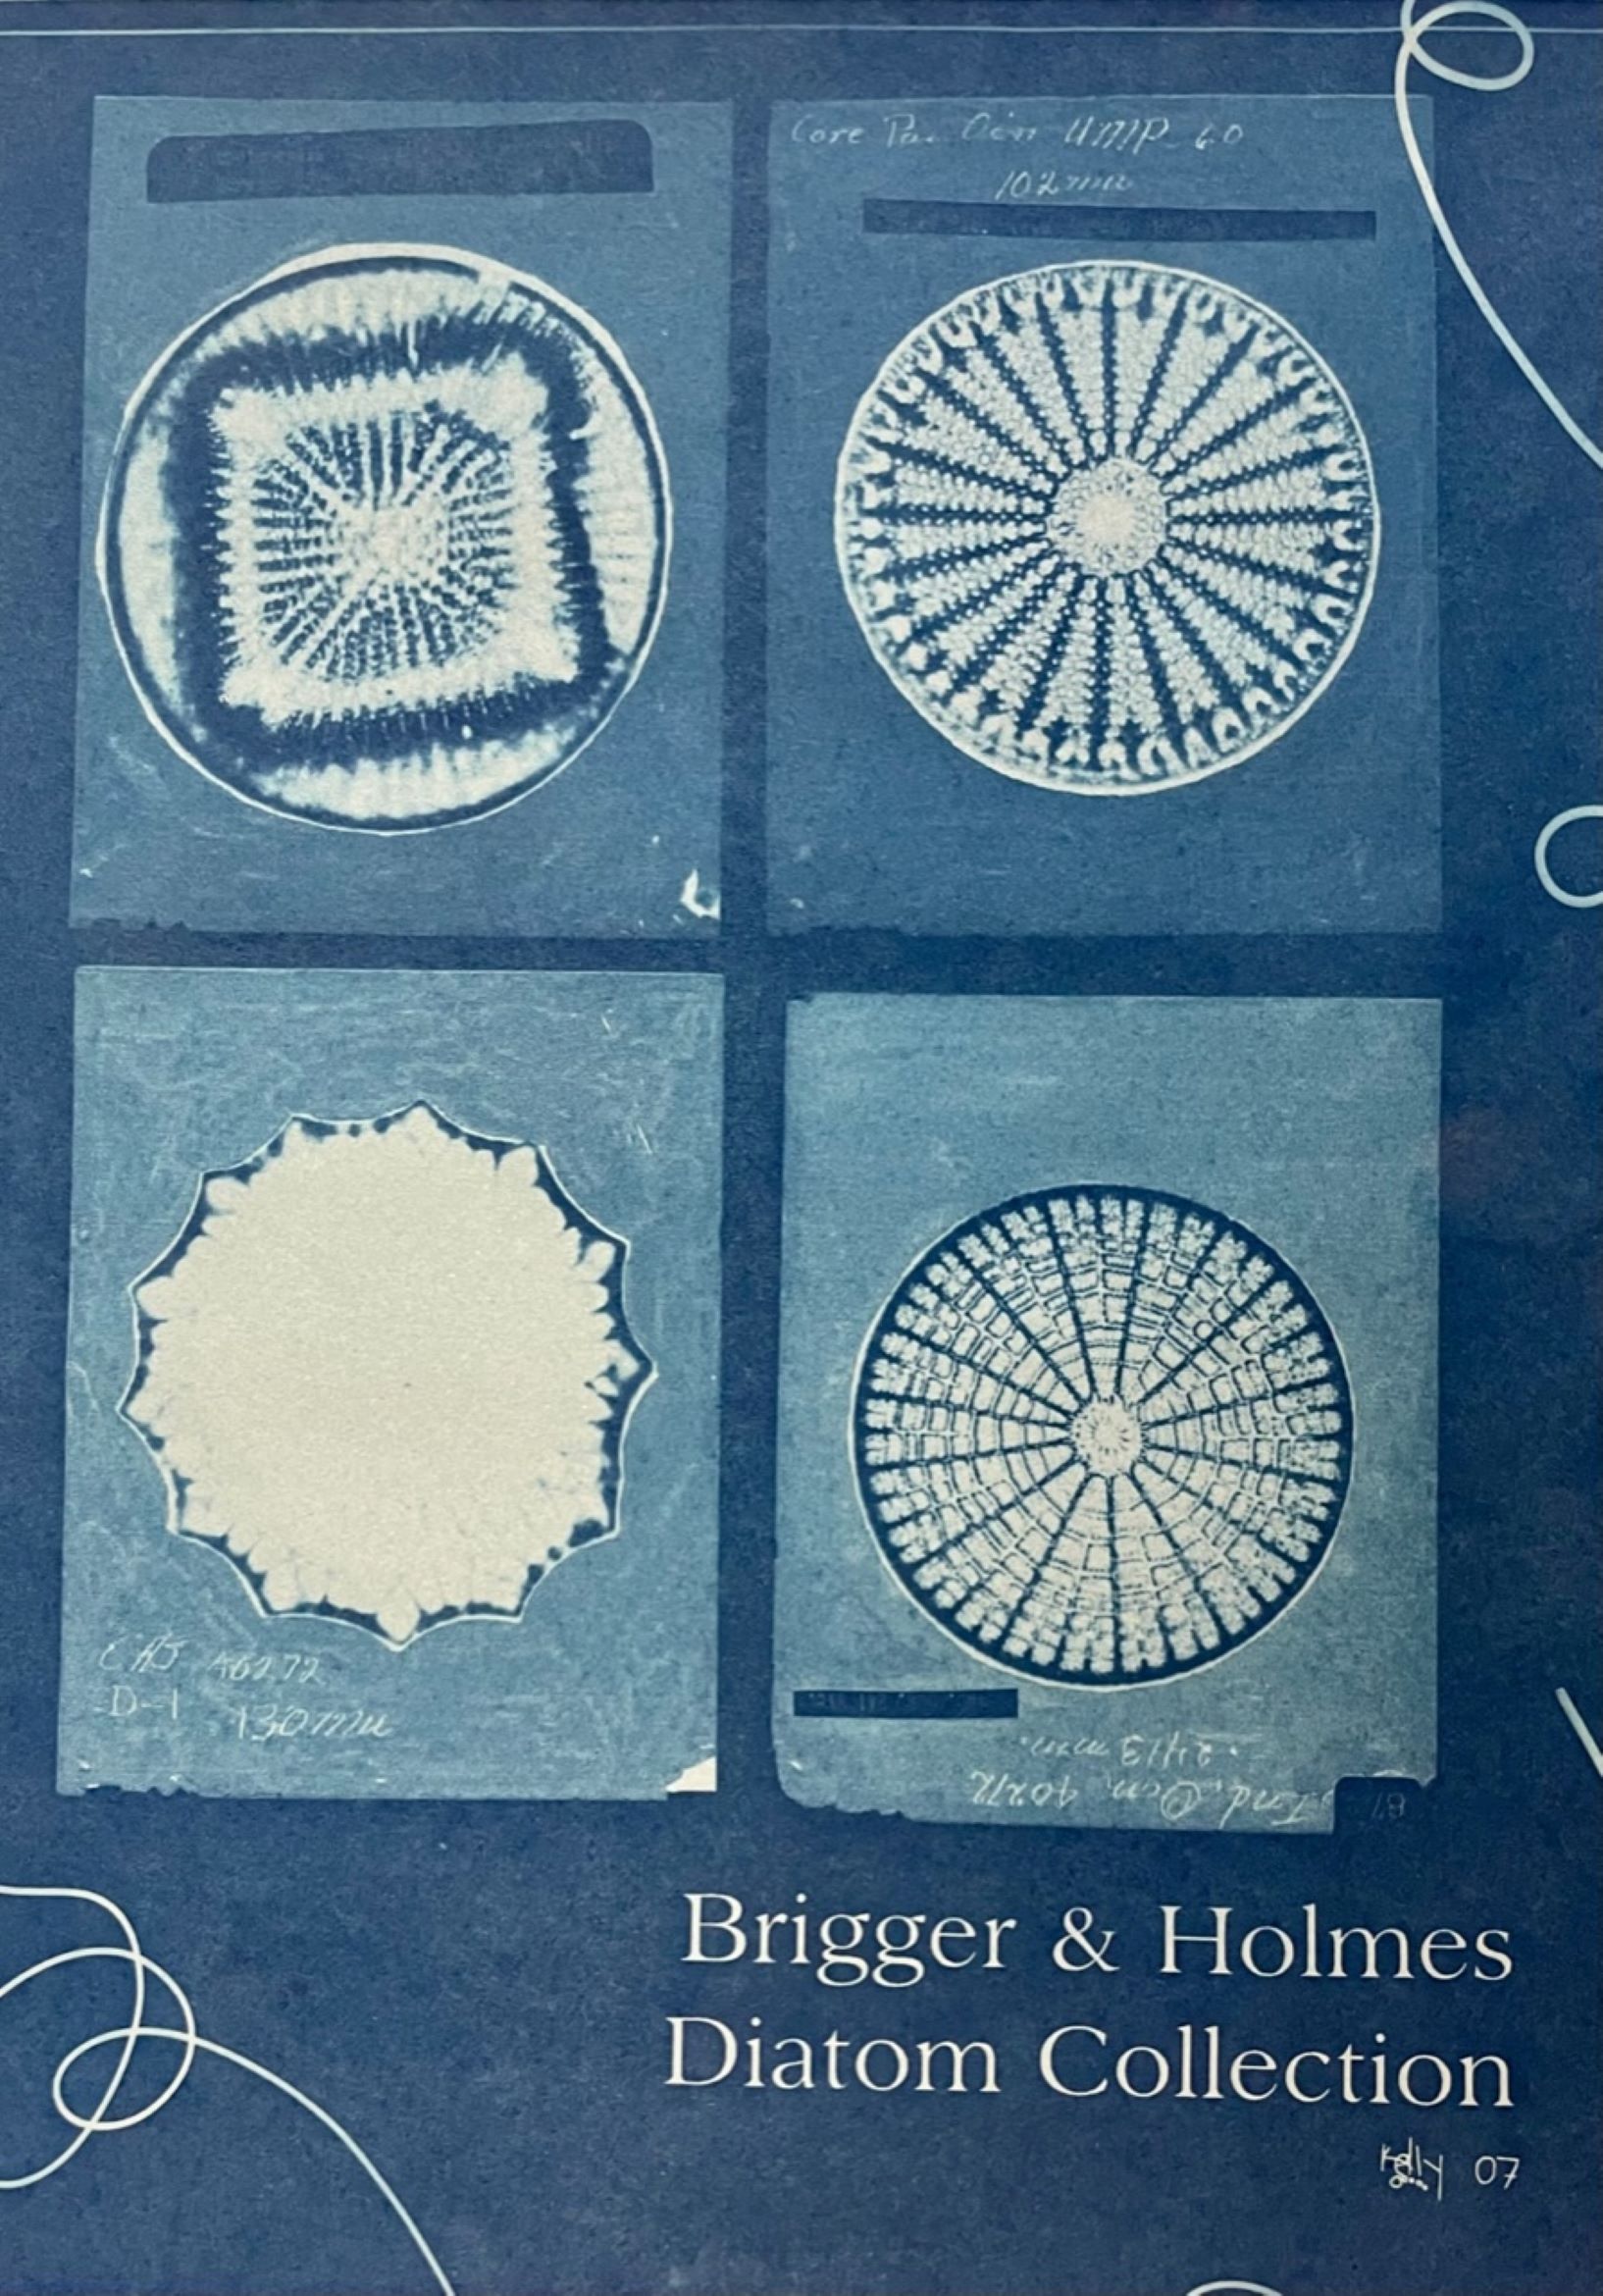 Cyanoprint of microscope images of diatoms and name of collection